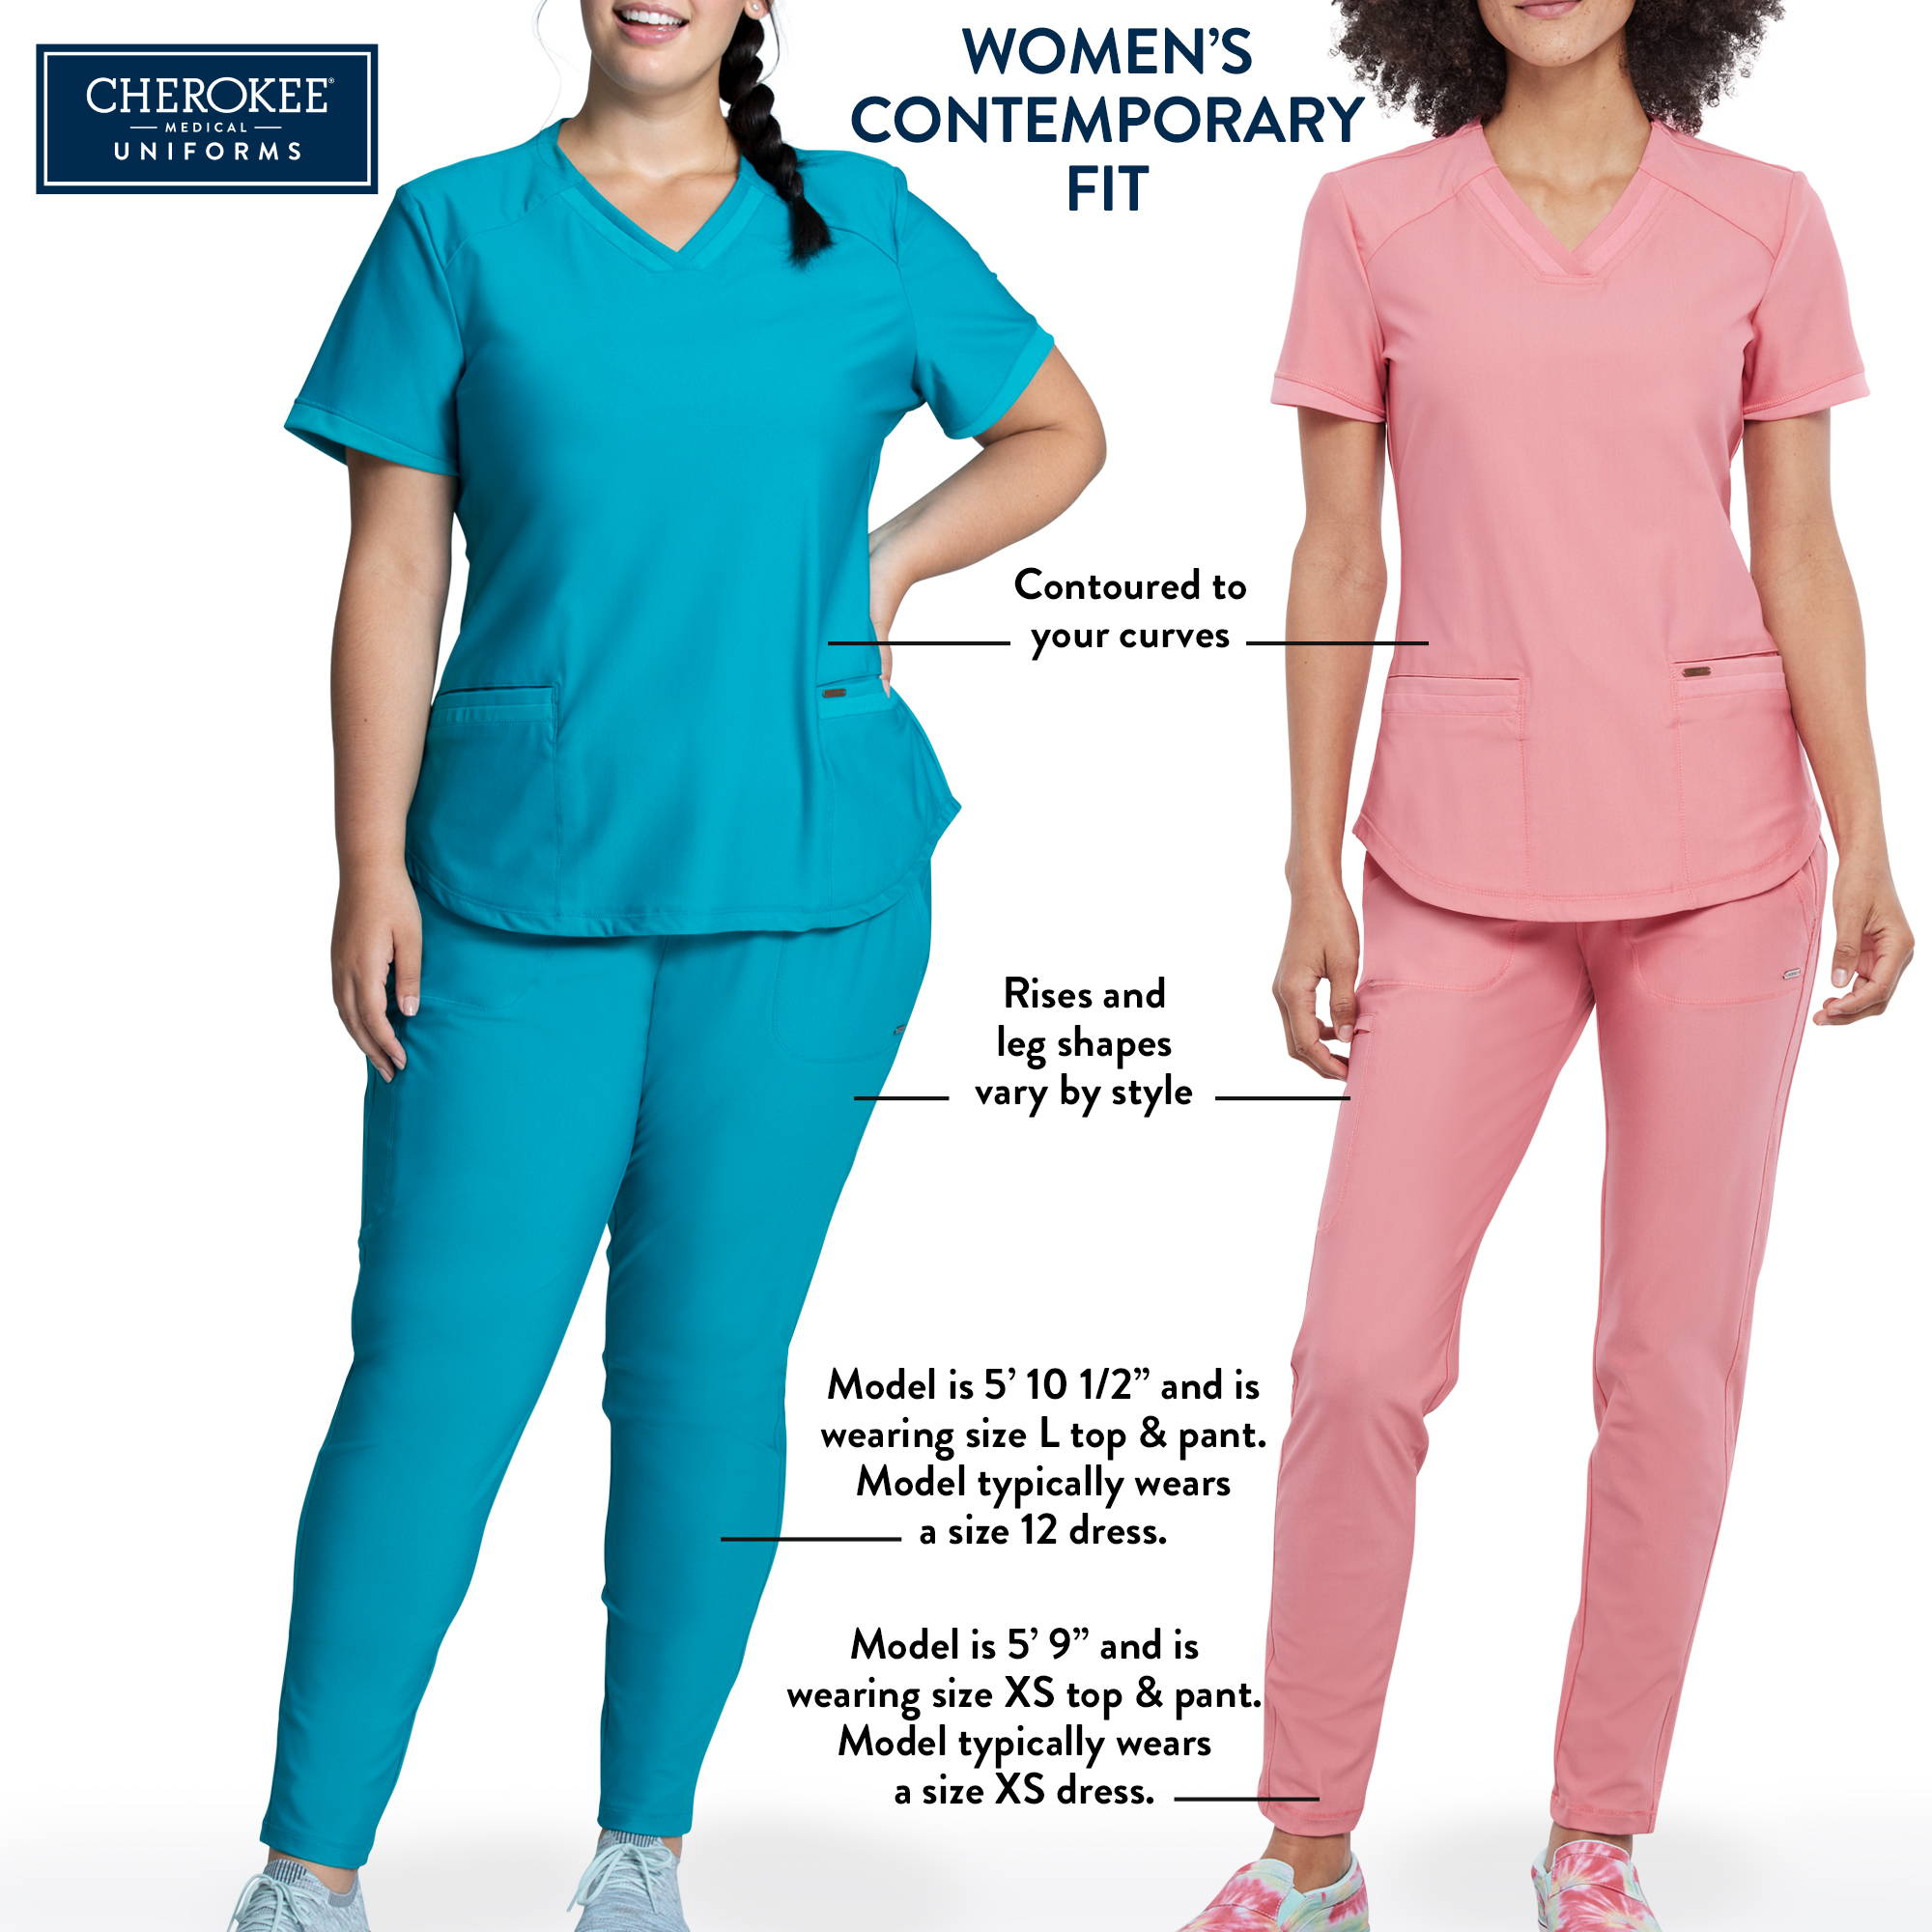 Cherokee Uniforms Women's Contemporary Fit Guide